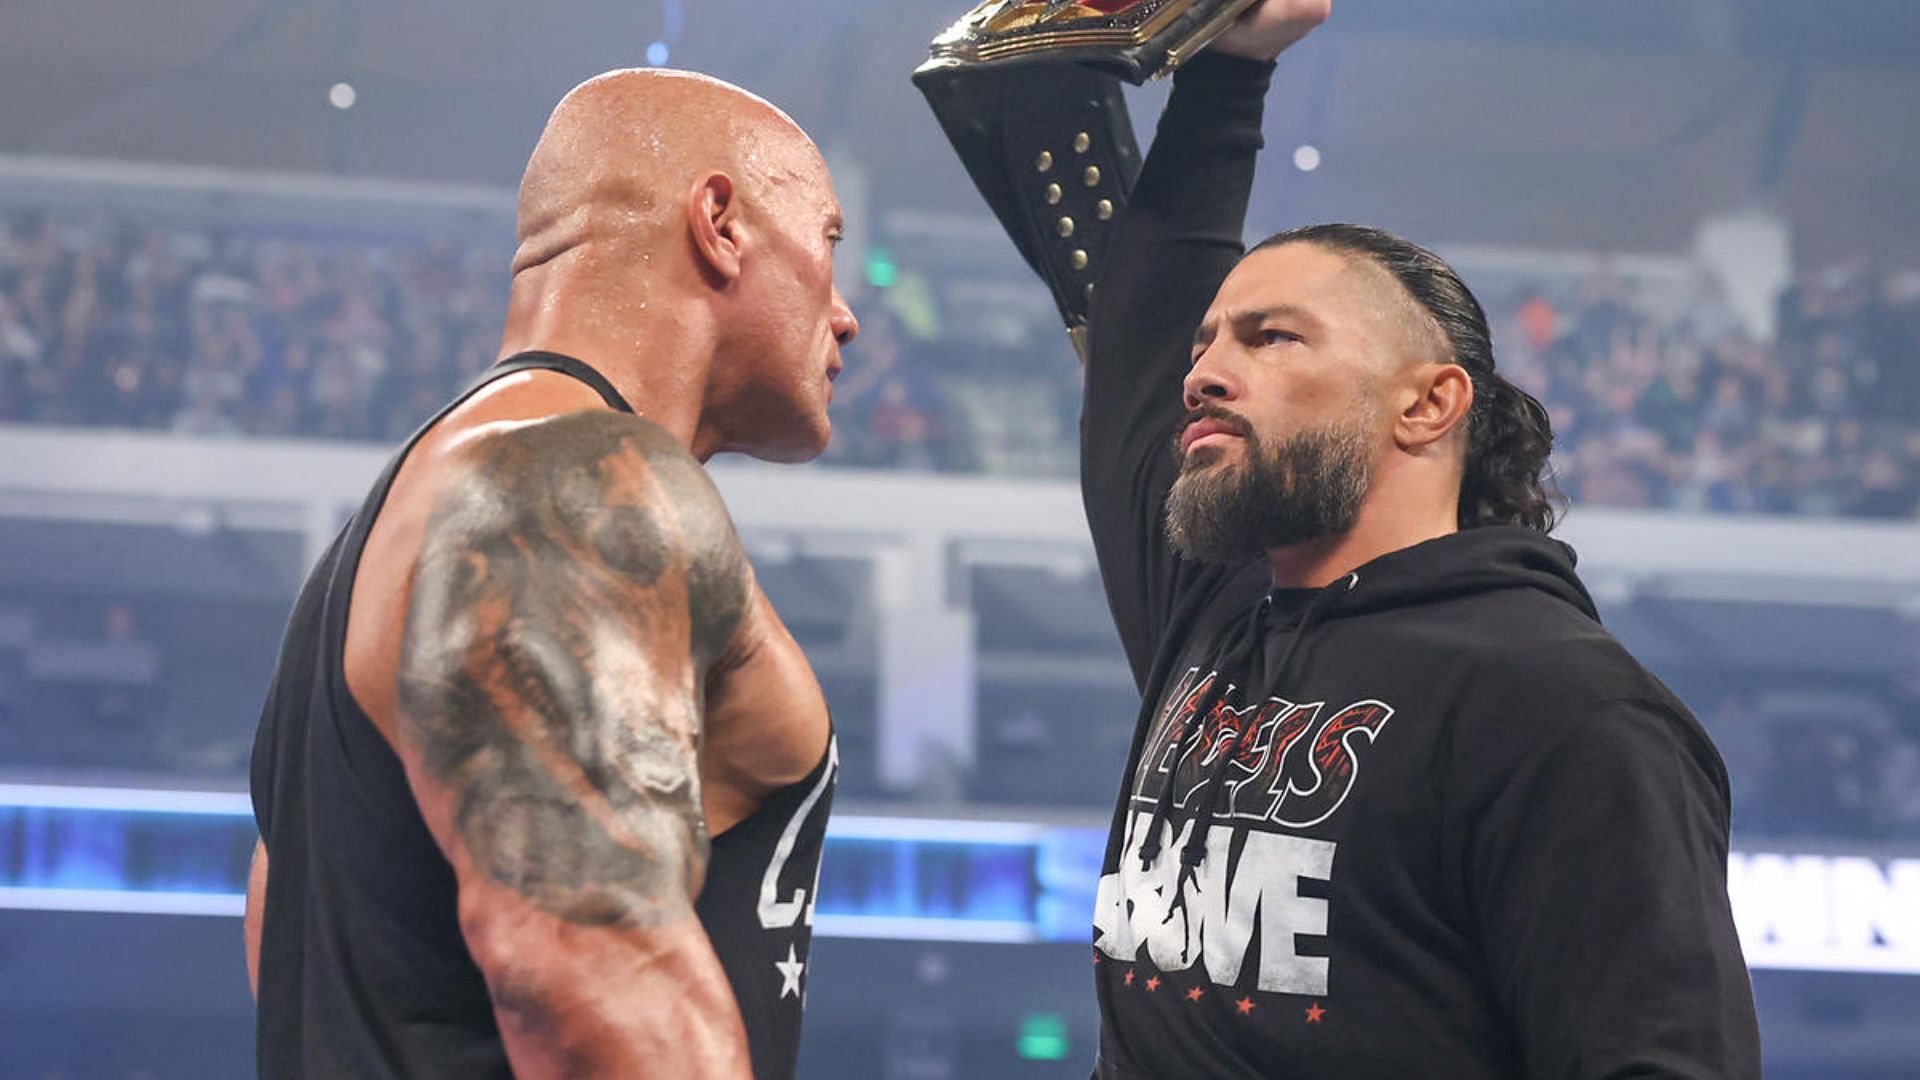 The Rock vs. Roman Reigns could main event WrestleMania 40